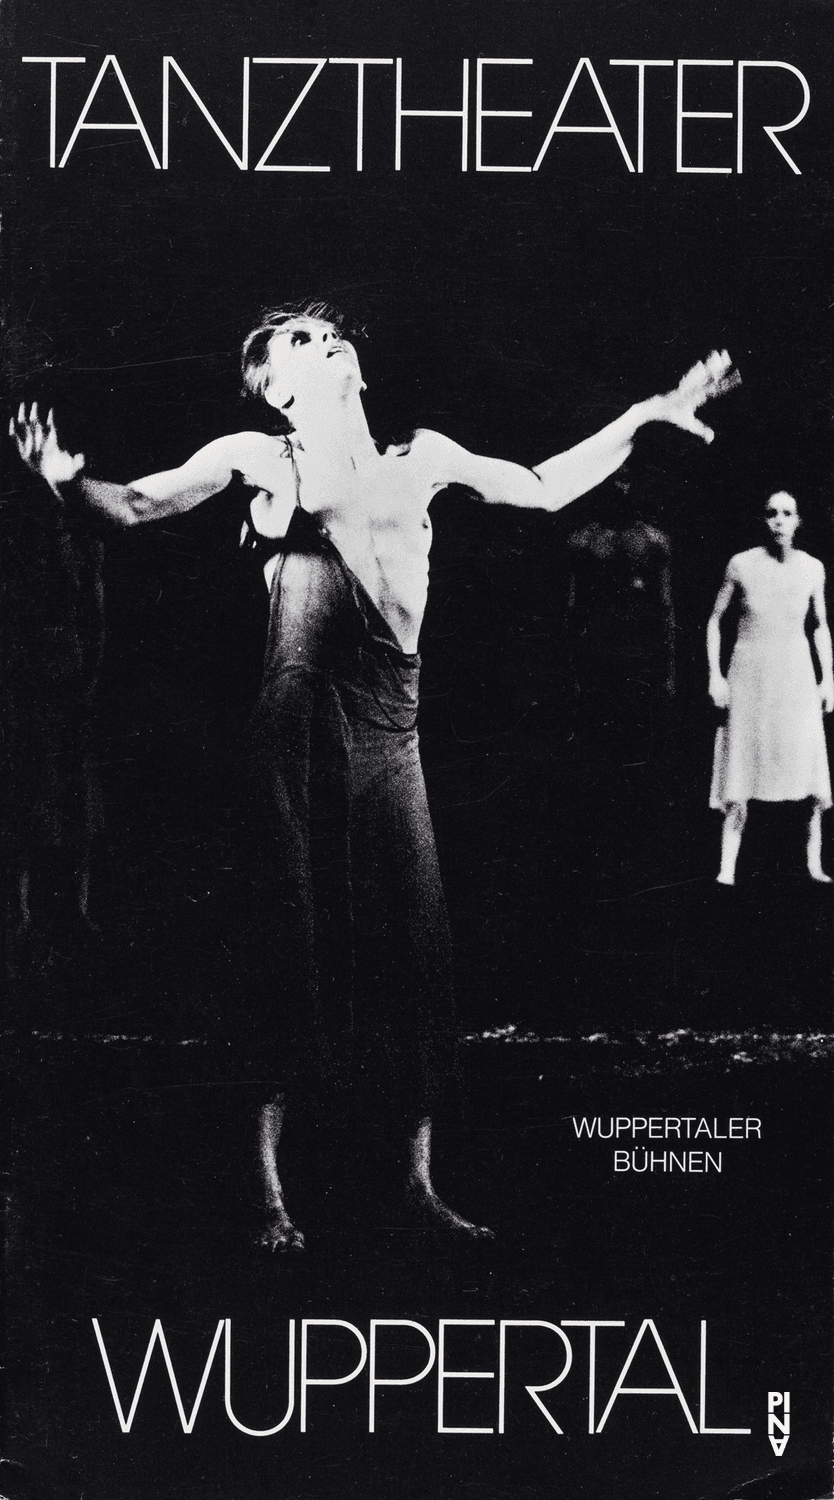 Booklet for “The Rite of Spring”, “The Second Spring” and “Wind From West” by Pina Bausch, season 1978/79